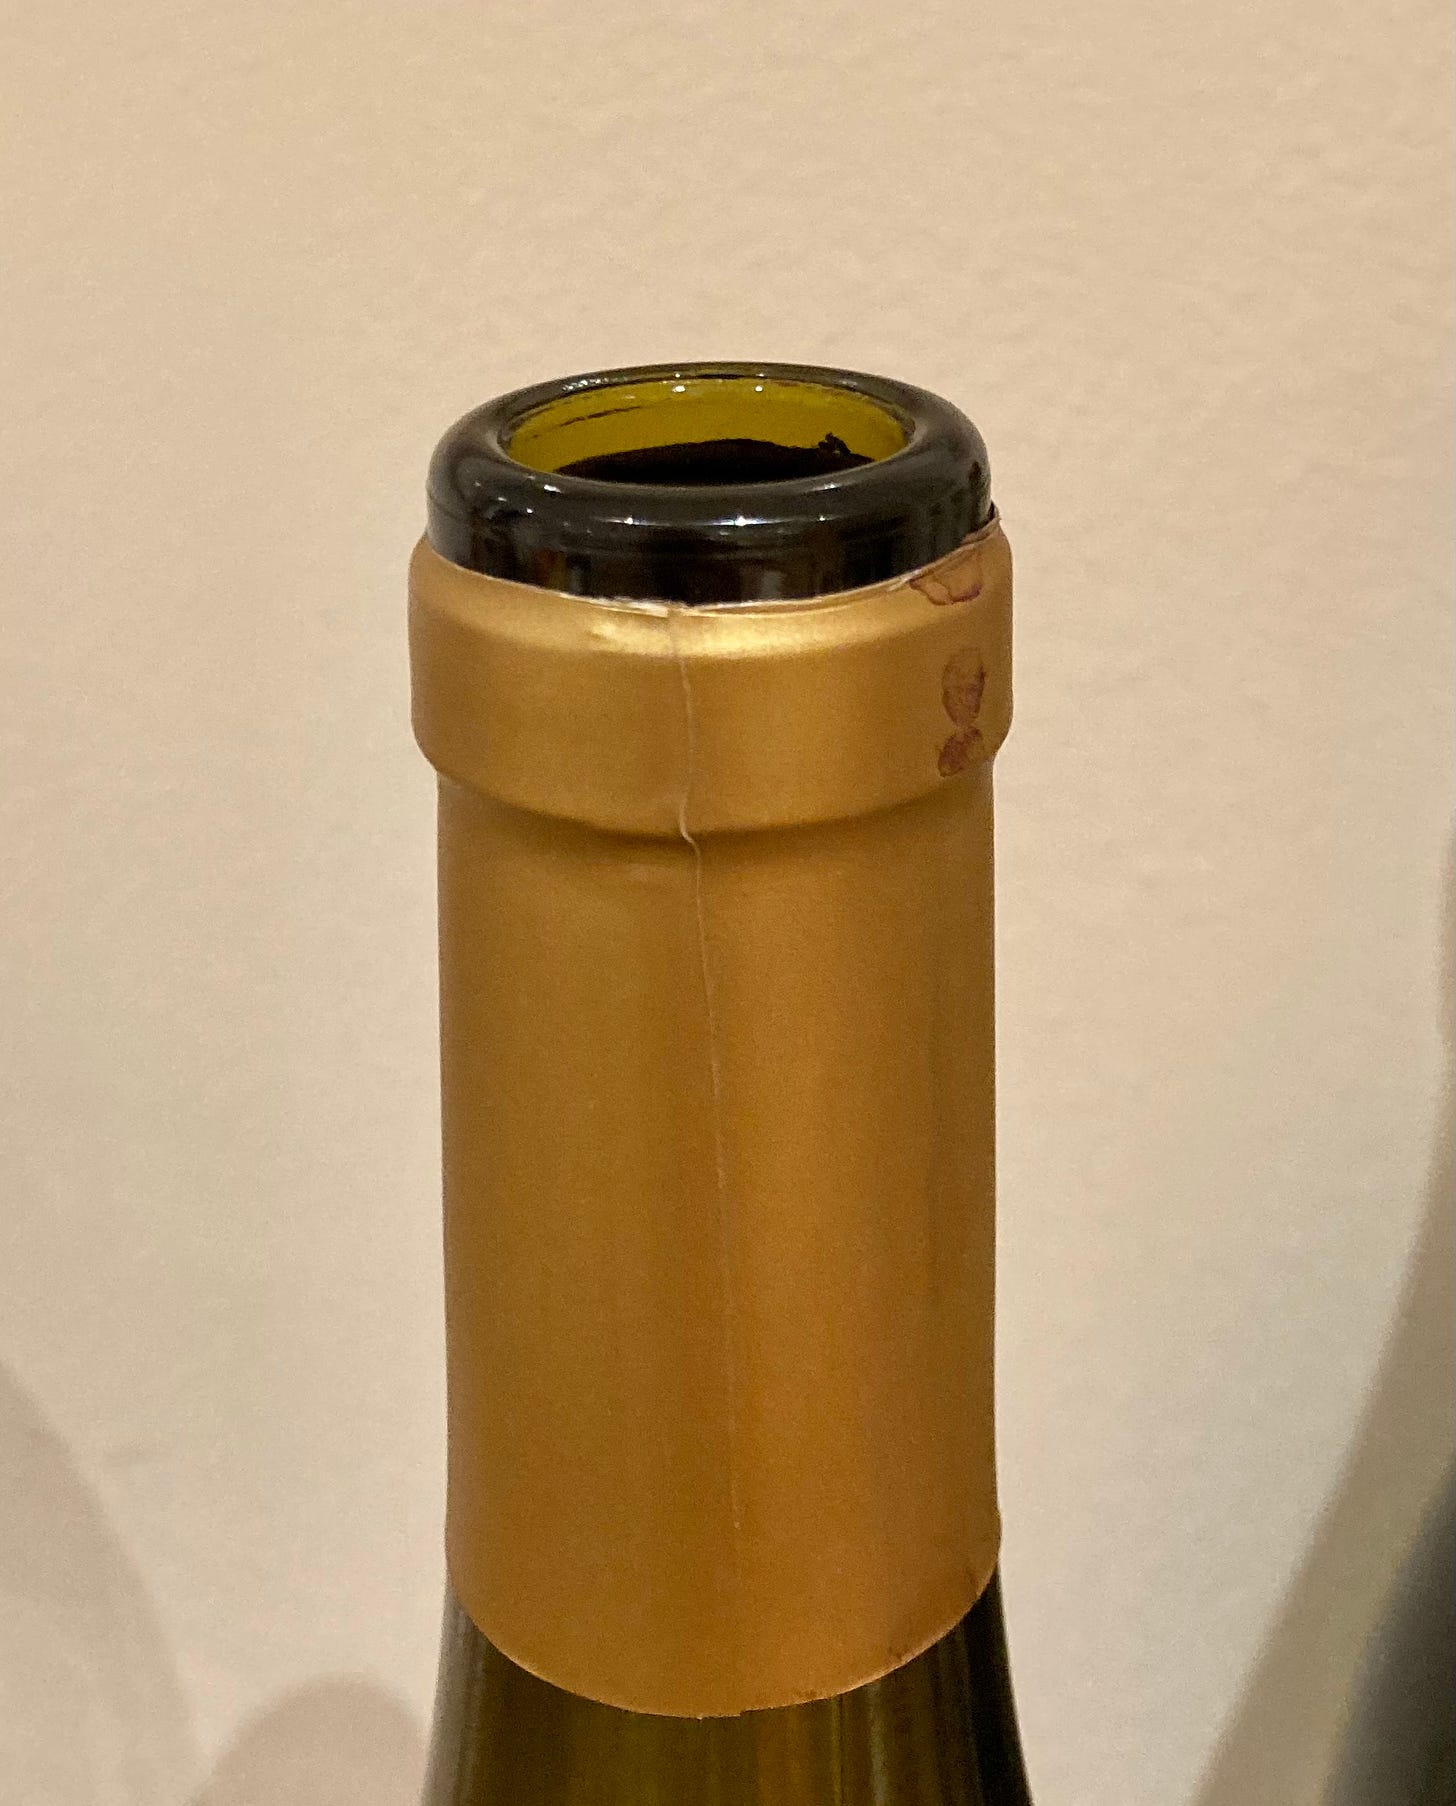 A wine bottle with a capsule that has had the top removed to give access to the cork.